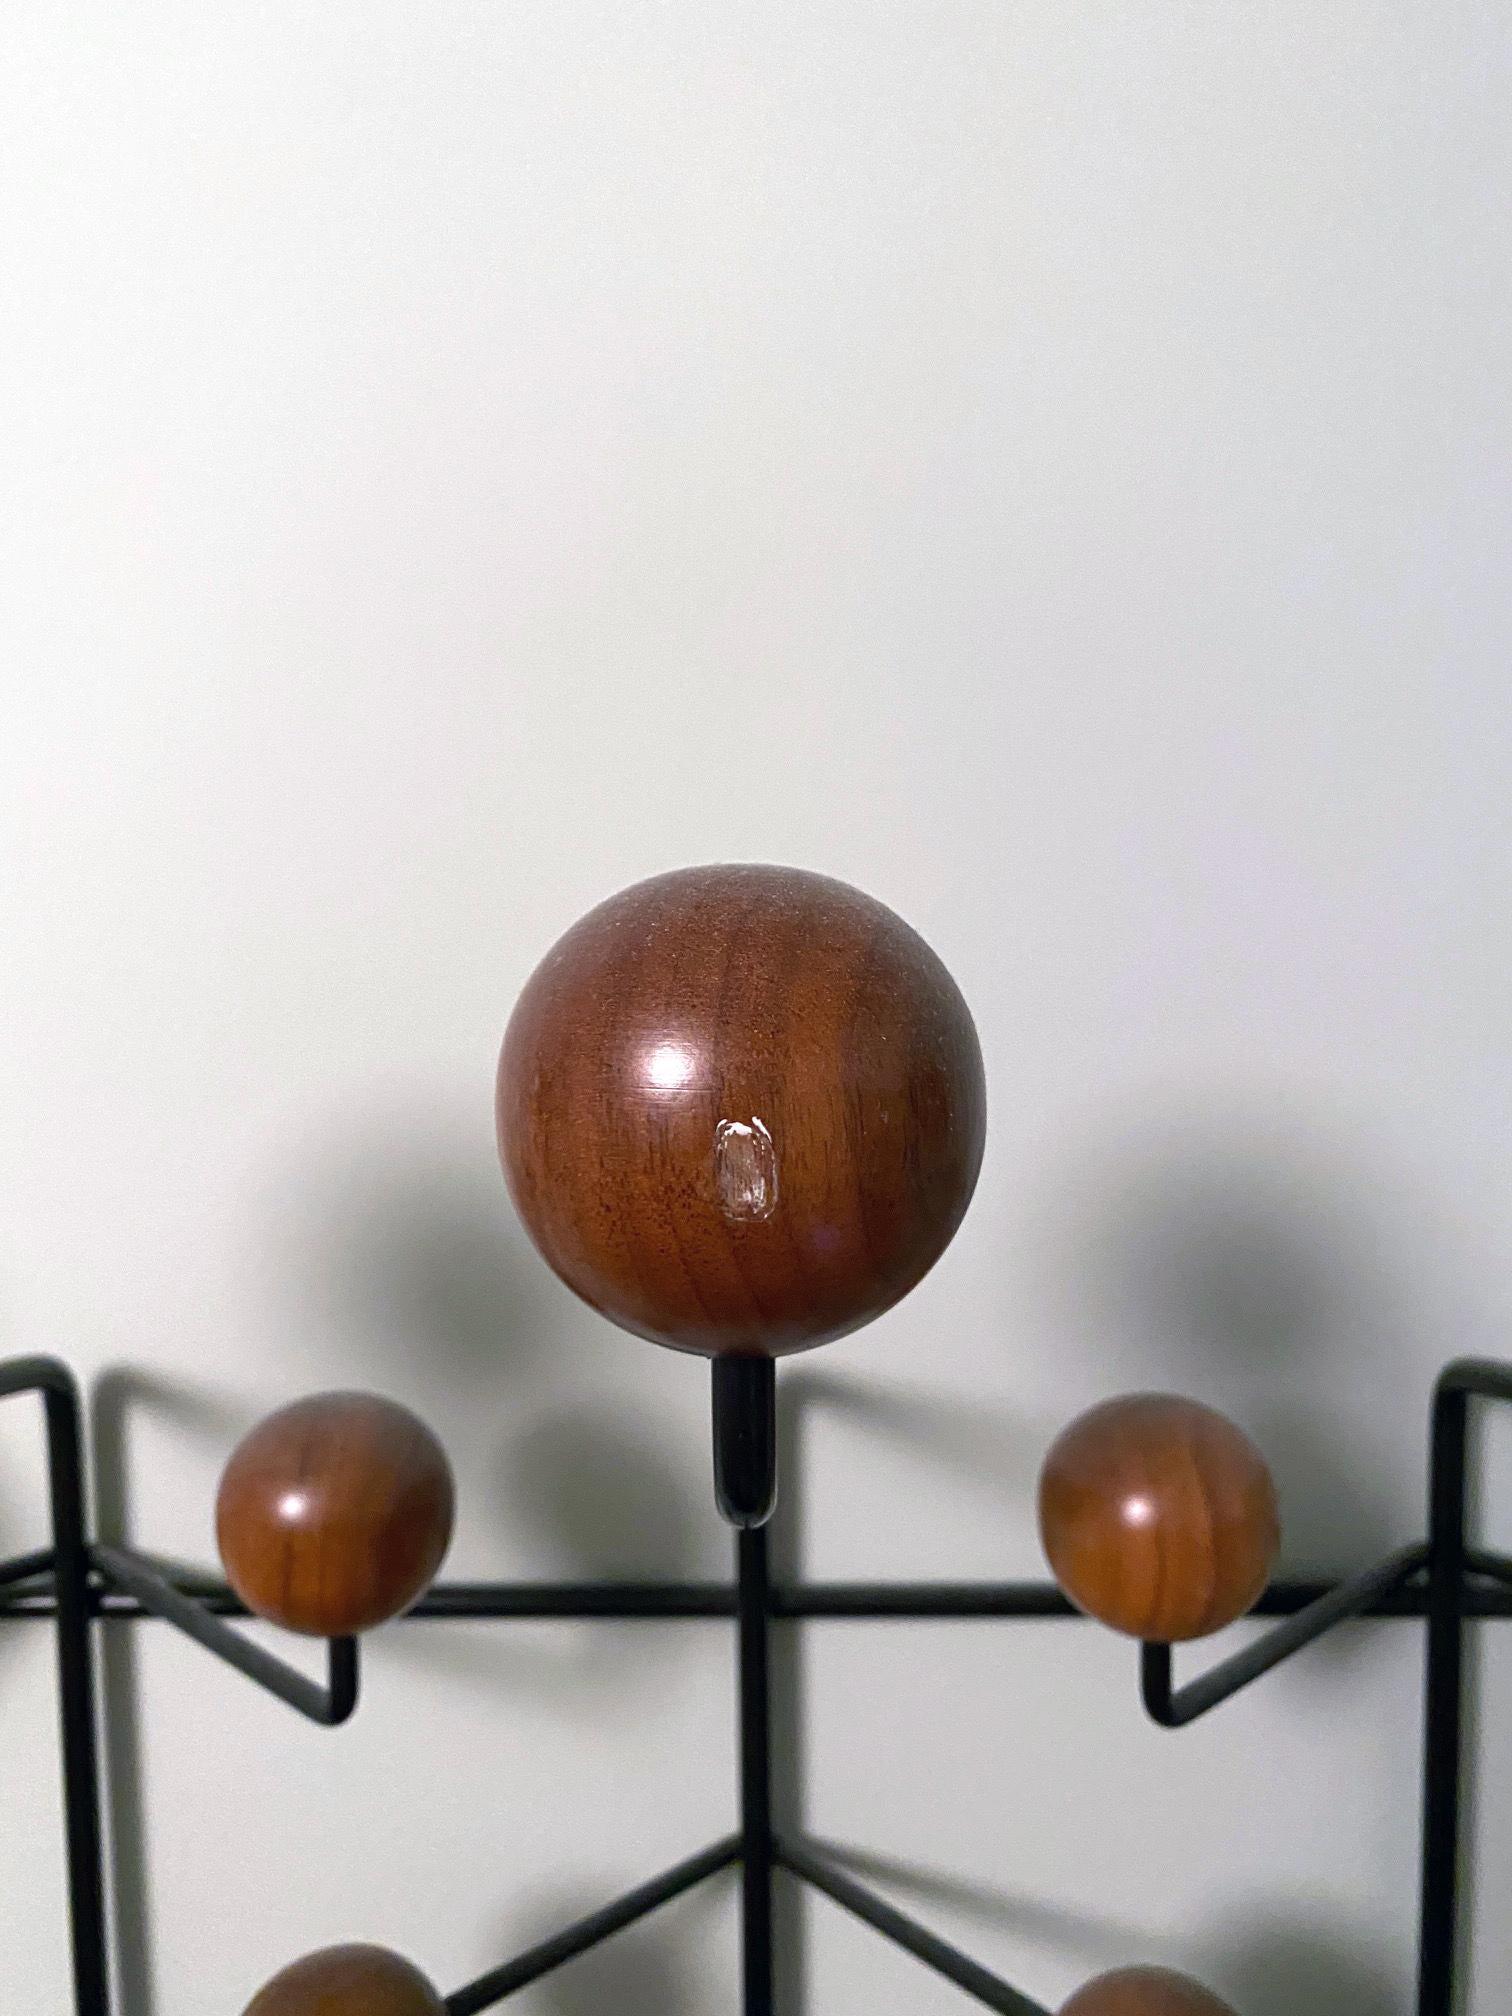 Contemporary Eames Hang-It-All Designed by Charles and Ray Eames, produced by Herman Miller